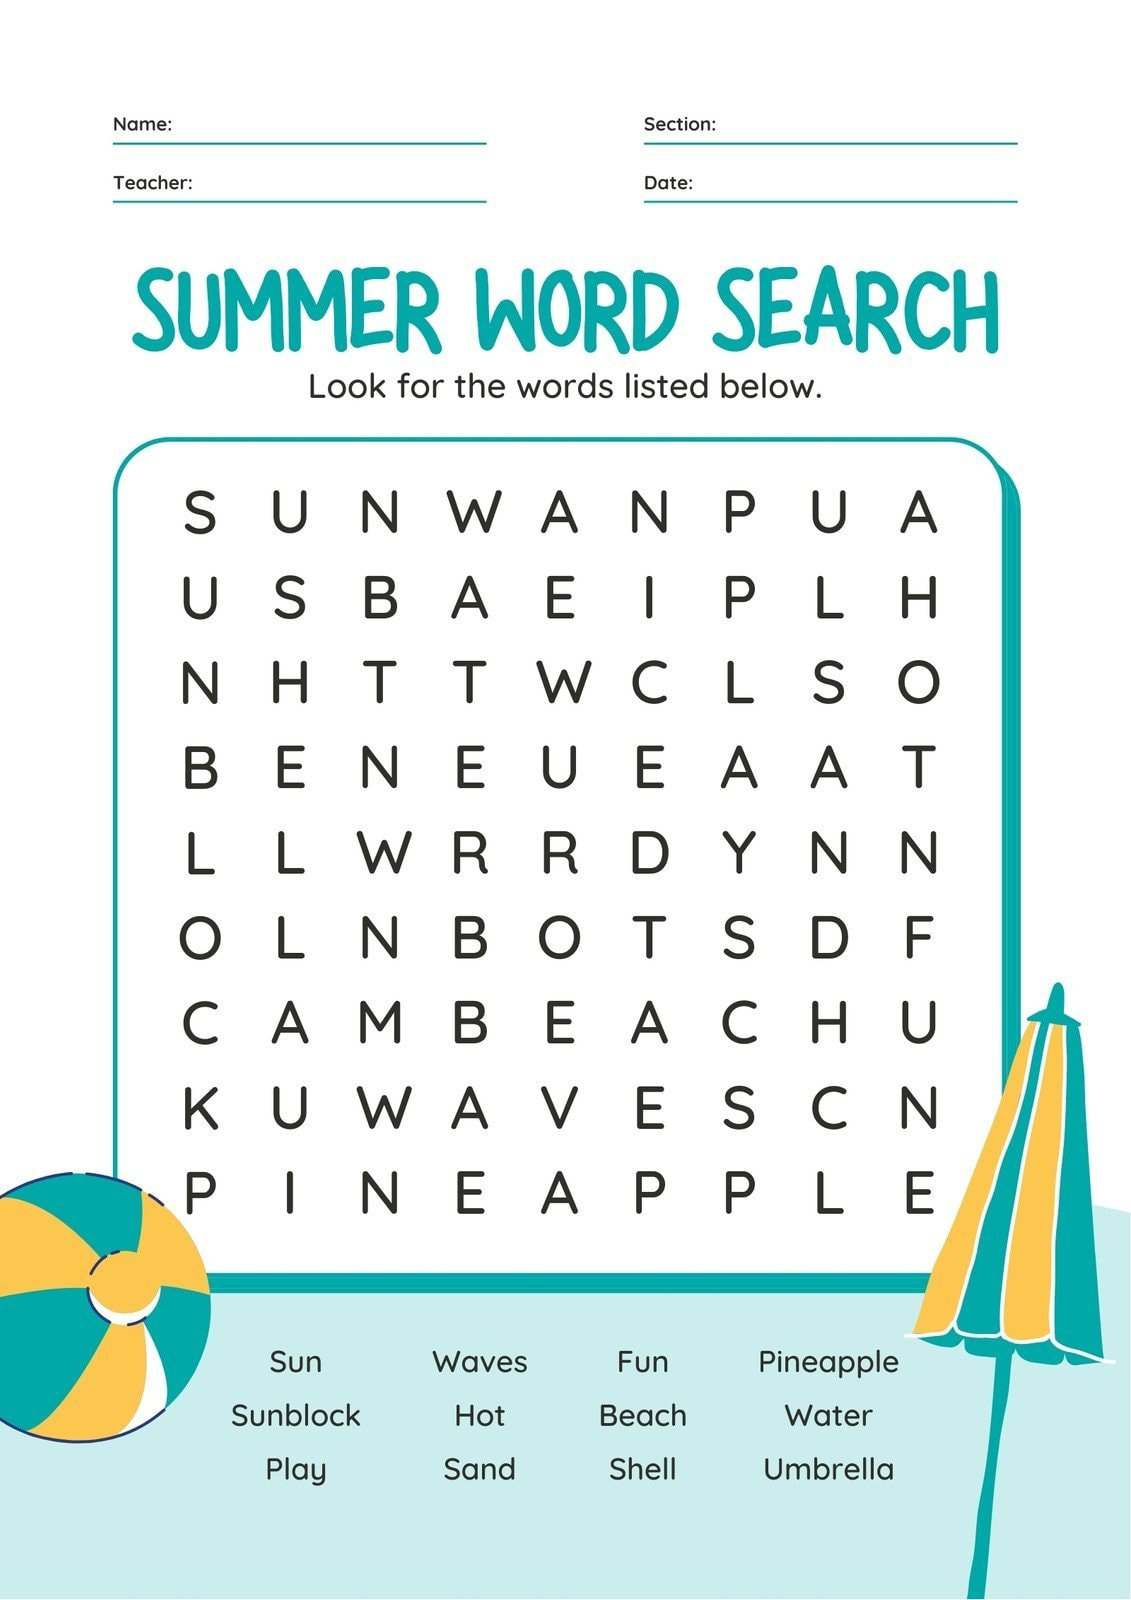 Free Word Search Maker – Make Your Own Word Search | Canva - Free Online Printable Word Search Puzzle Maker